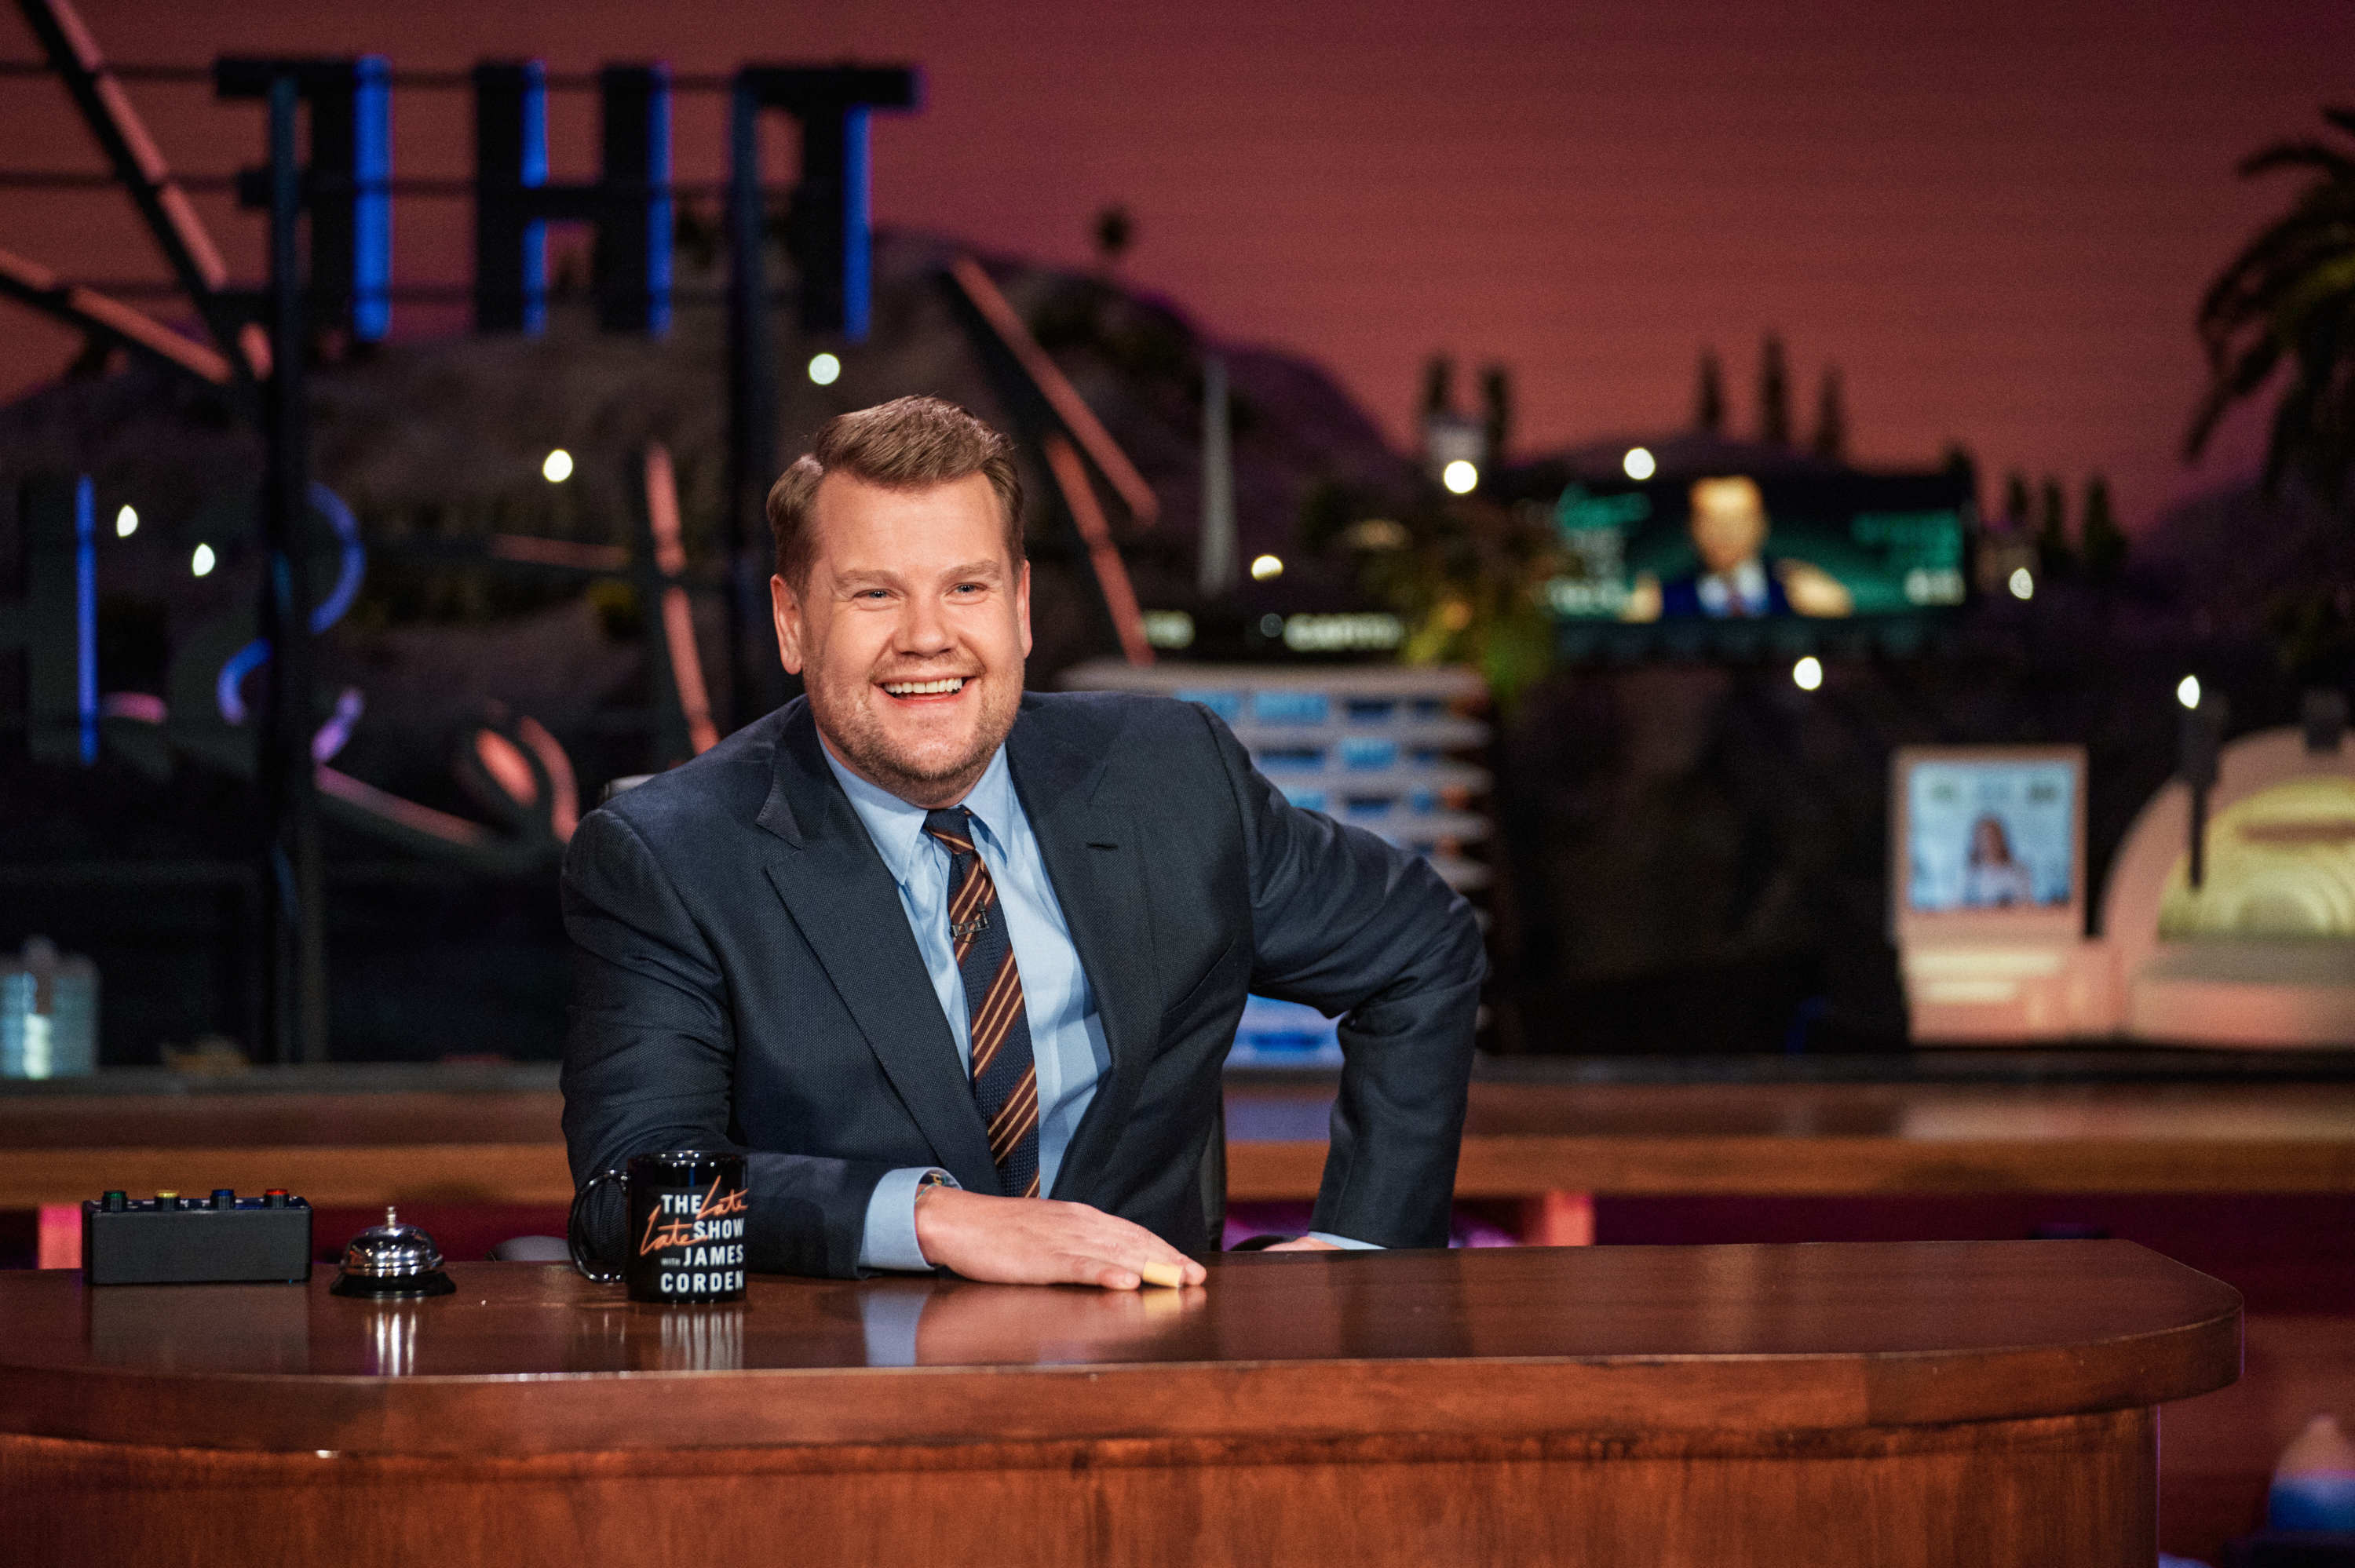 James Corden ‘Late Late Show’ Signs Off After Eight Years Of Airing